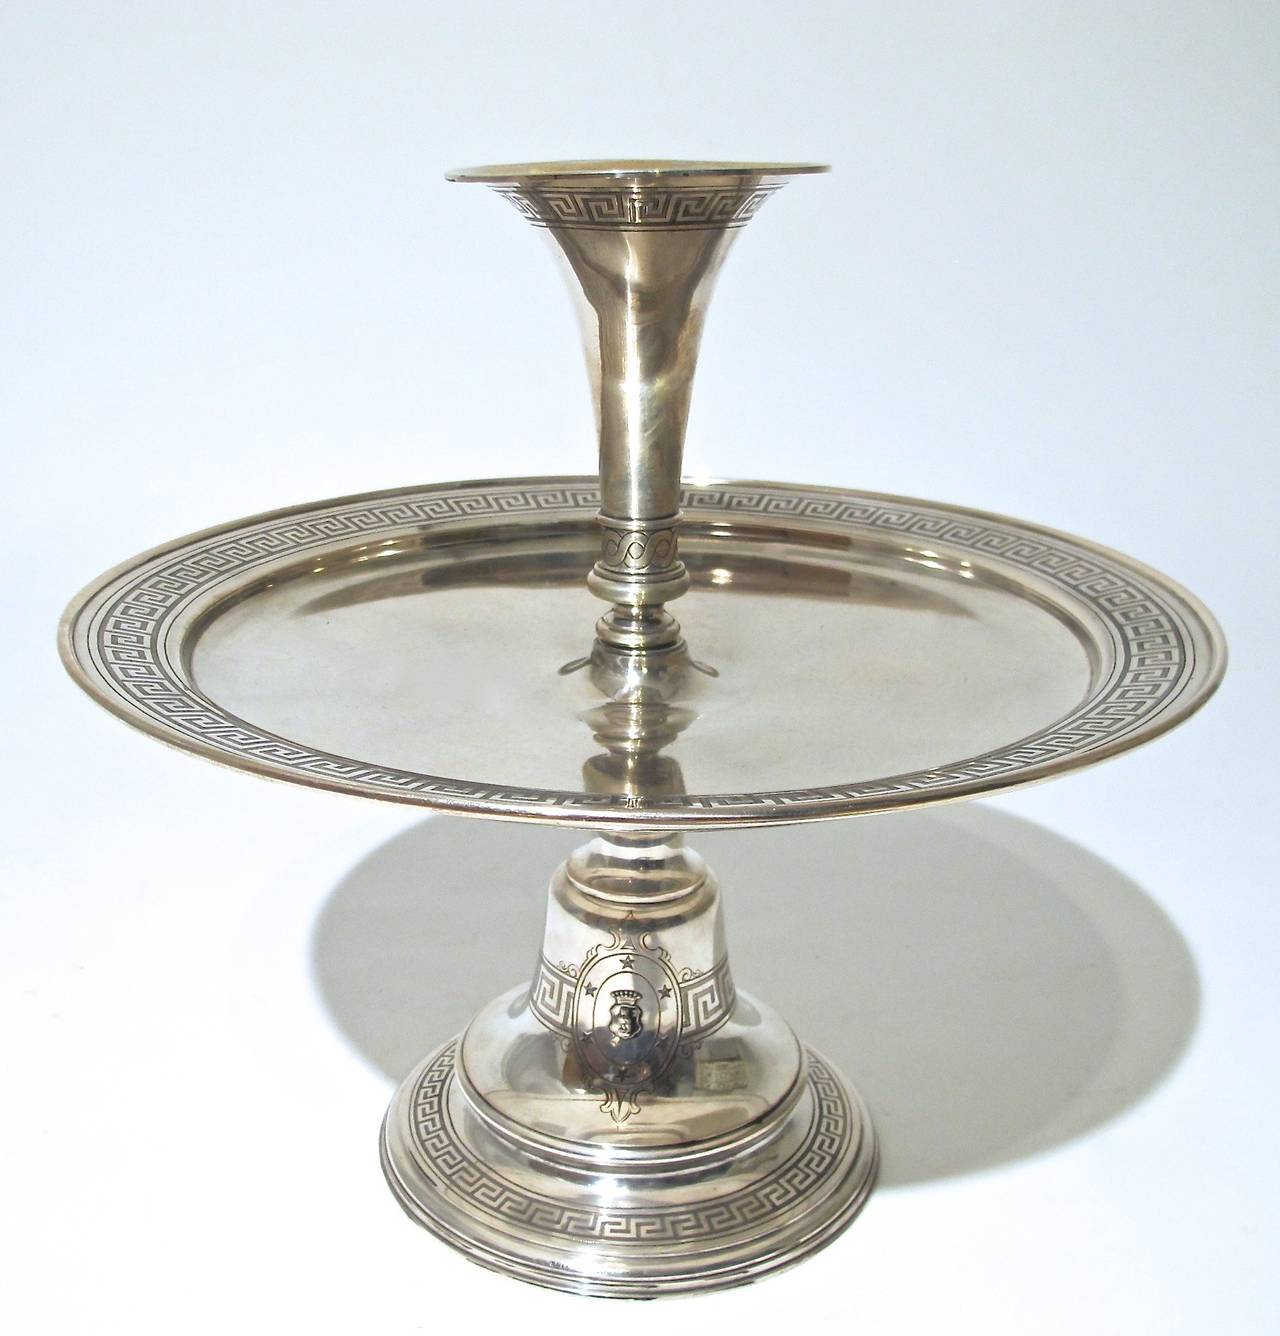 A German 800 silver centerpiece with a classic Greek Key design. Germany, late 19th century.